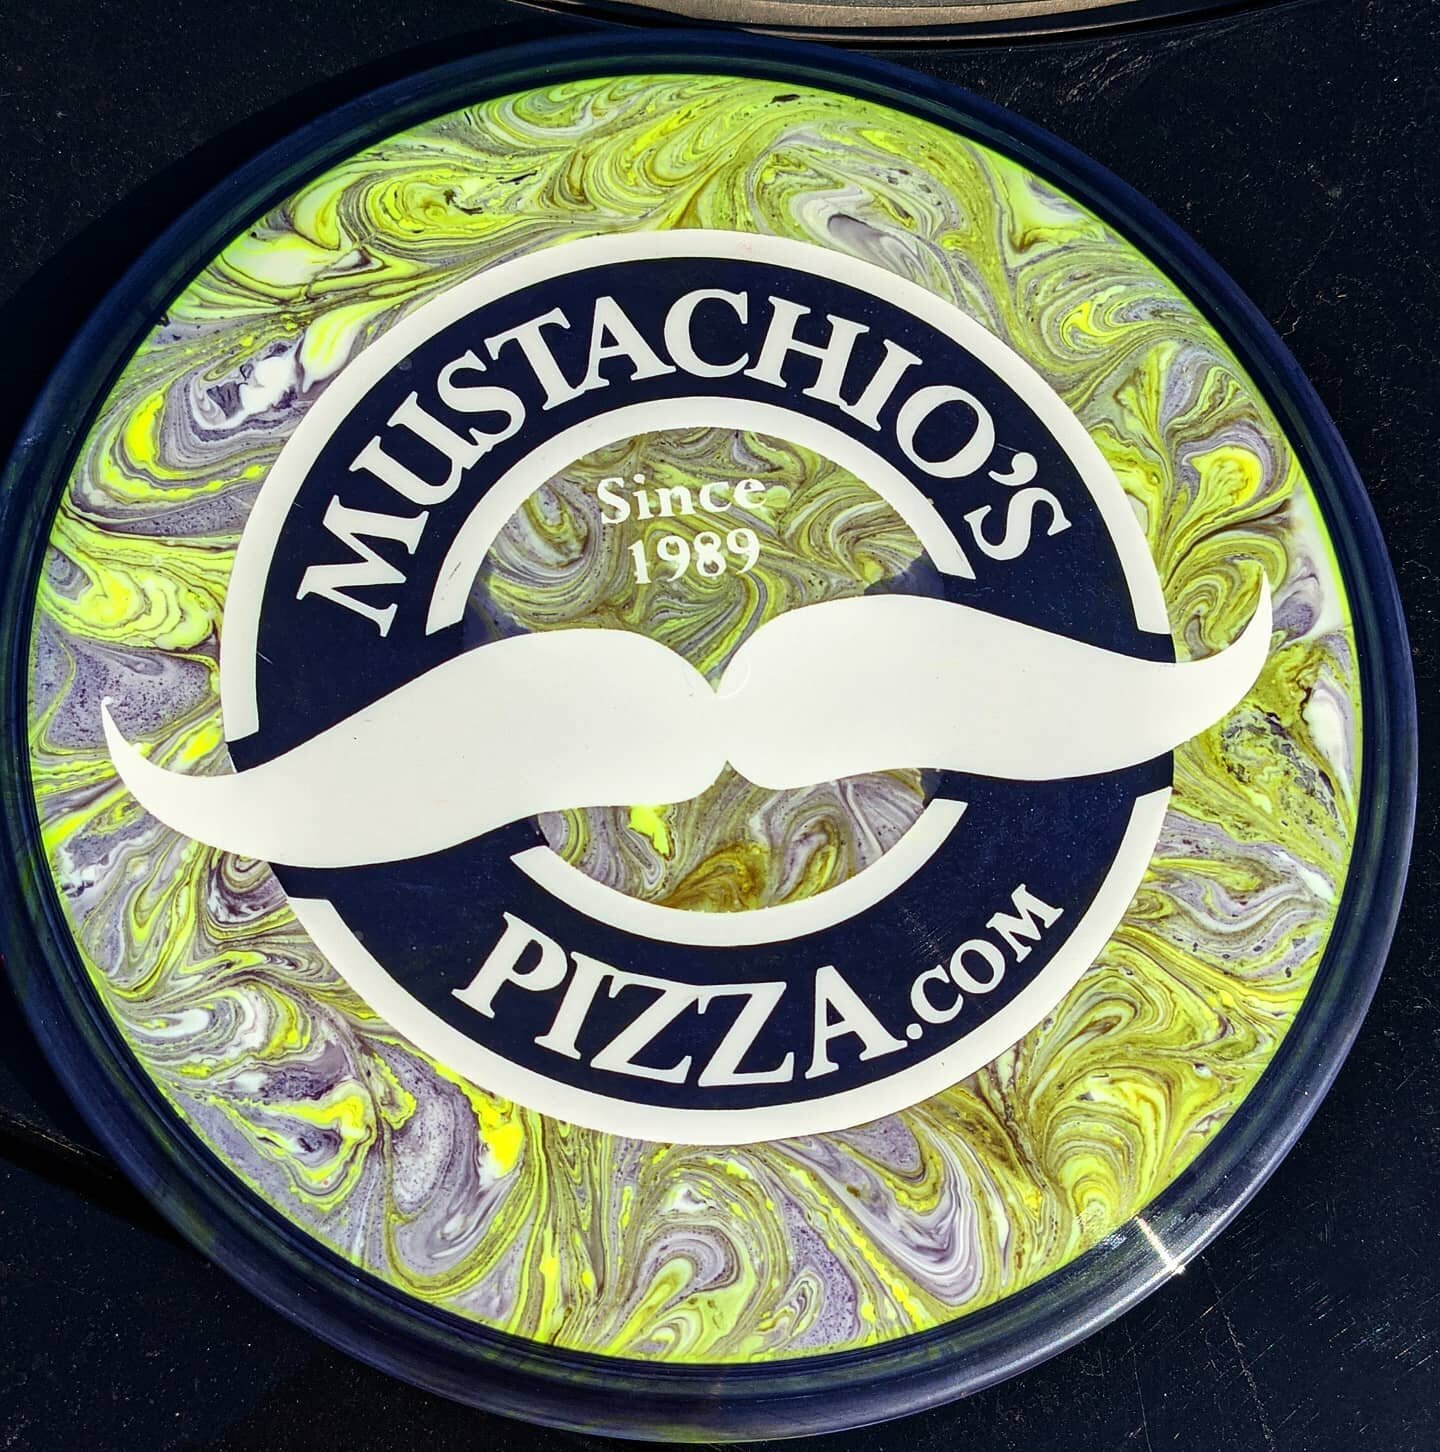 @rickhann3360 has found a new talent, thanks for dyeing this @dynamicdiscs Felon for me!
@mustachiospizza 

.

.

.

#discgolf #discdye #discporn #mustachios #felon #dynamicdiscs #teamtrilogy #trulyuniquediscgolf